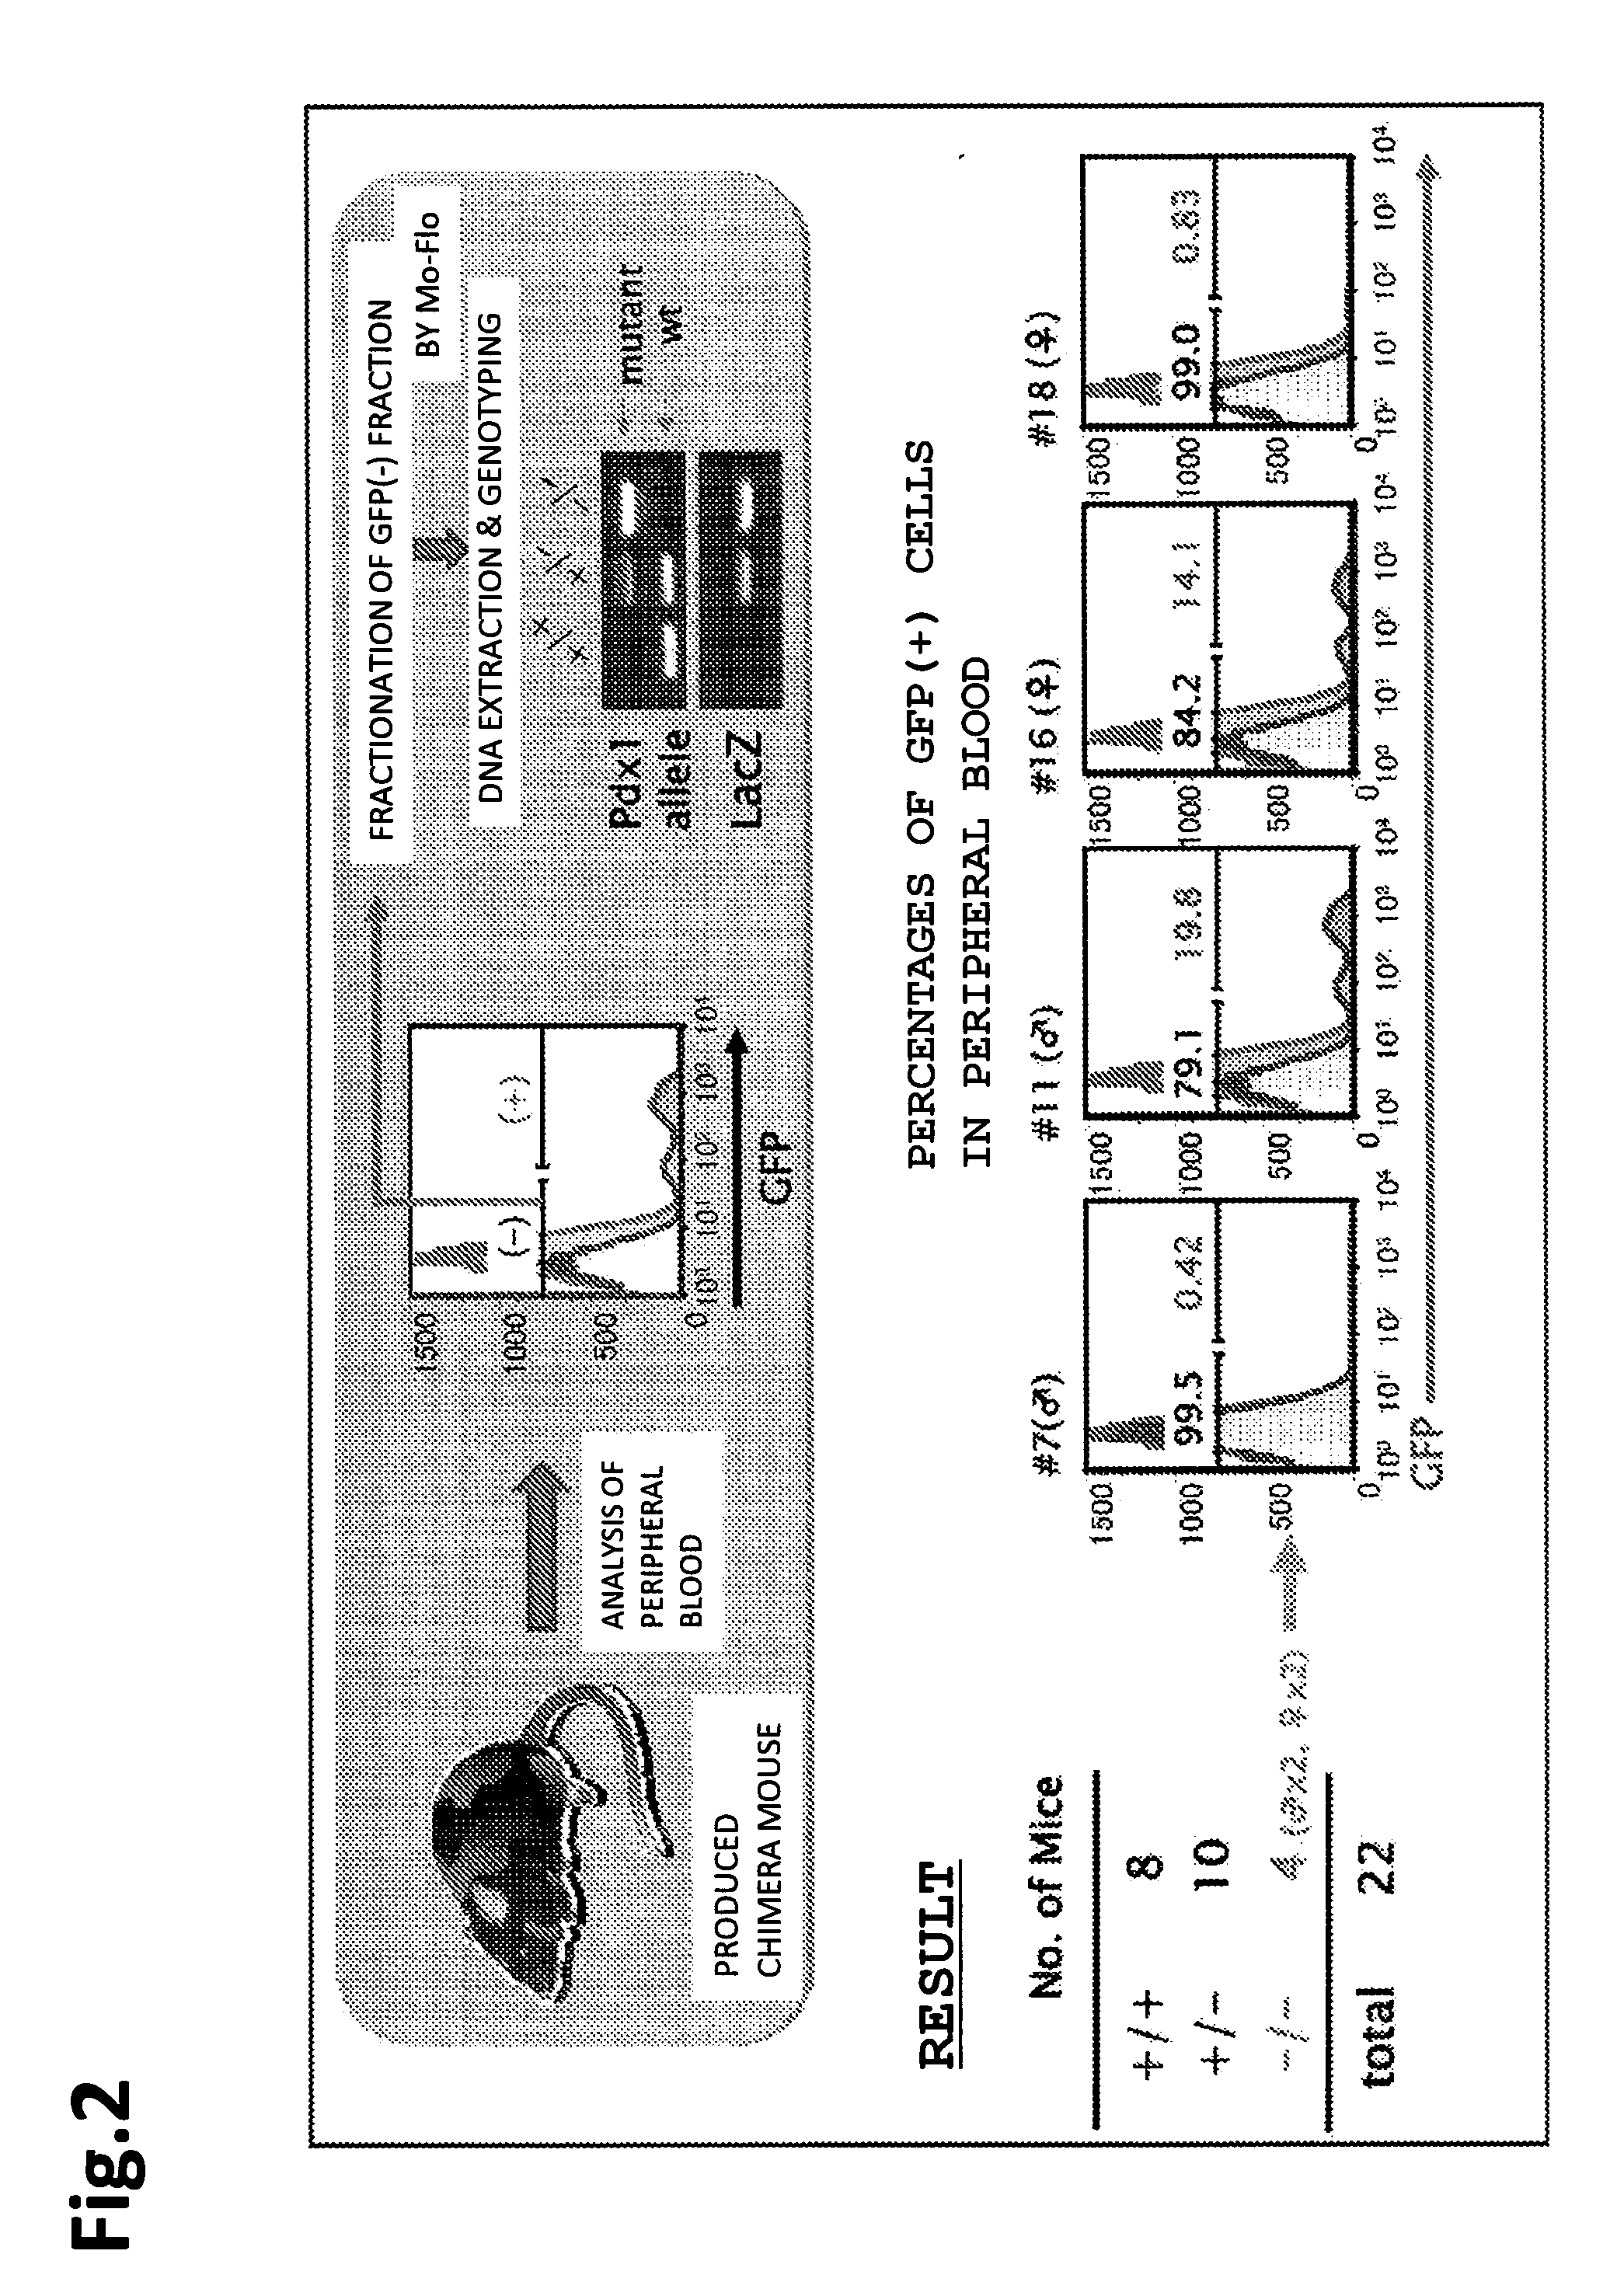 Method for producing founder animal for reproducing animal having lethal phenotype caused by gene modification